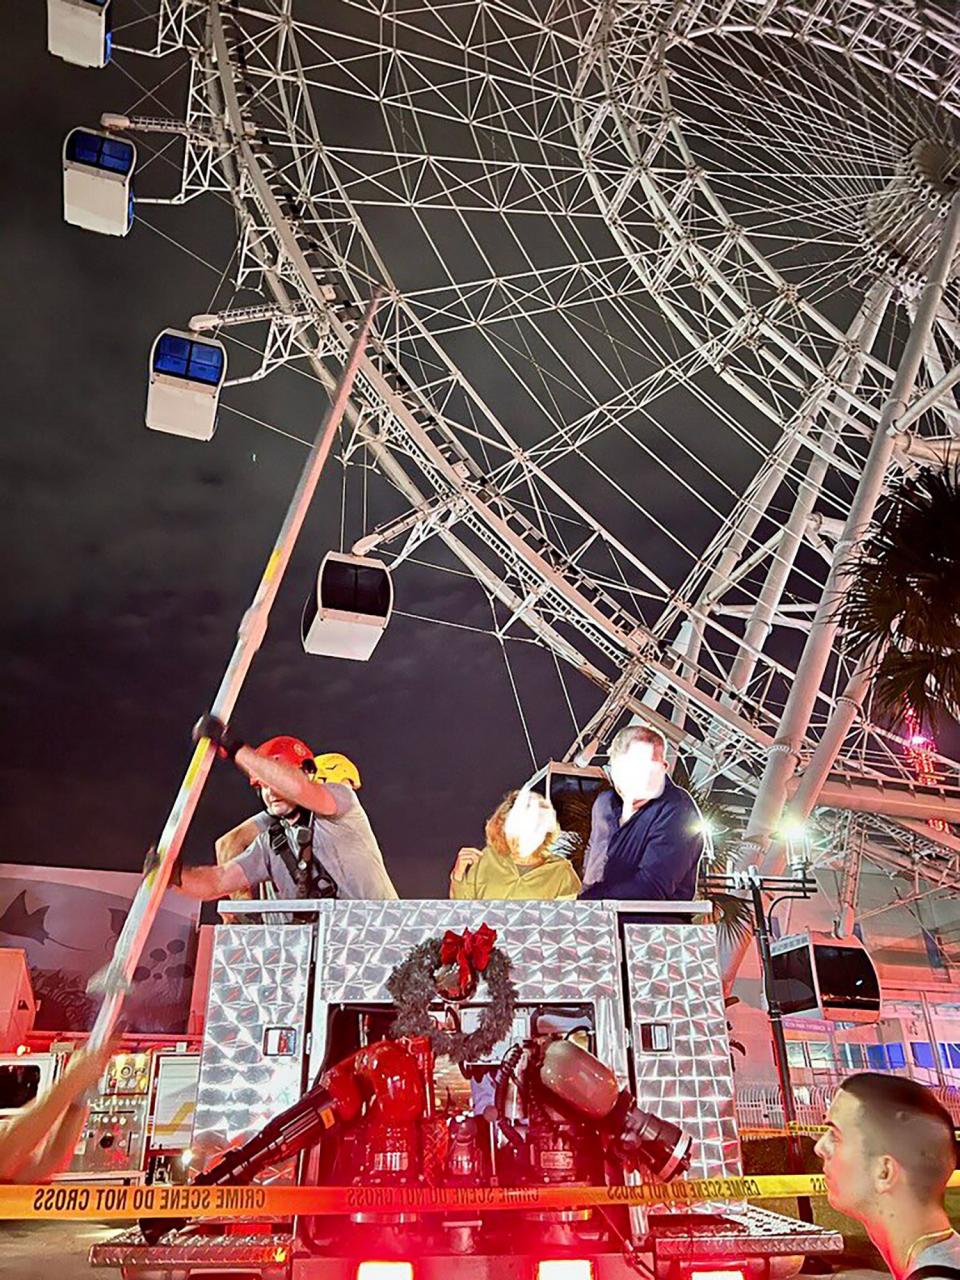 62 Riders Trapped on Ferris Wheel After it Loses Power. https://twitter.com/OCFireRescue/status/1609394745142382592. Caption: Orange County Fire Rescue